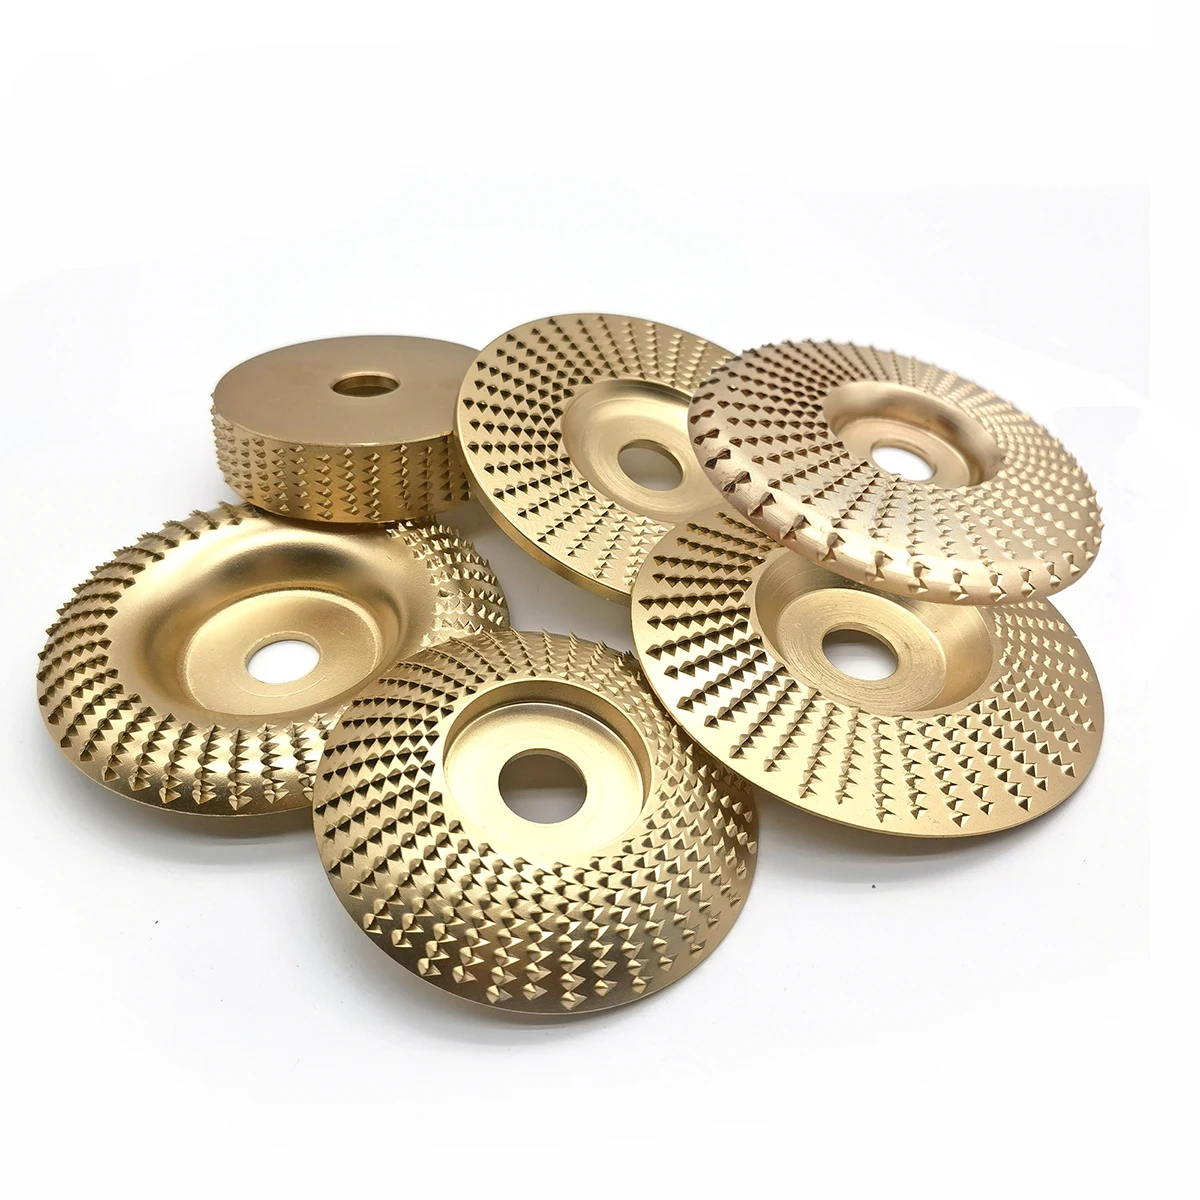 7pcs Bore 16/22mm Wood Grinding Polishing Wheel Rotary Disc Sanding Wood Carving Tool Abrasive Disc Tools for Angle Grinder